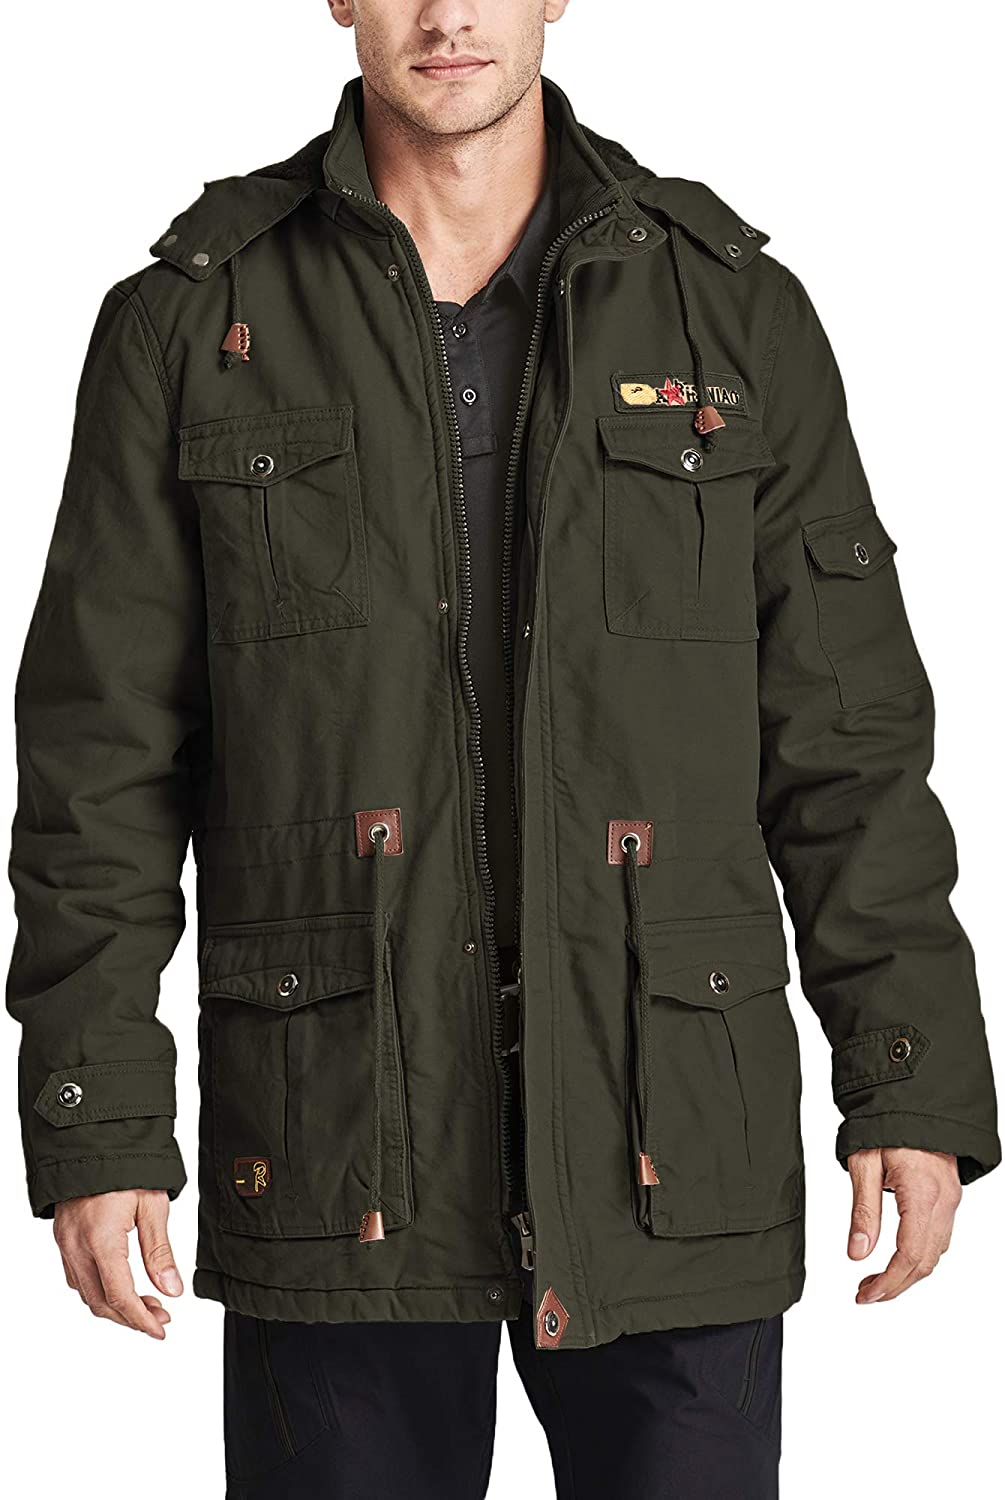 MAGCOMSEN Men's Winter Cargo Jacket with Multi Pockets Thicken Military